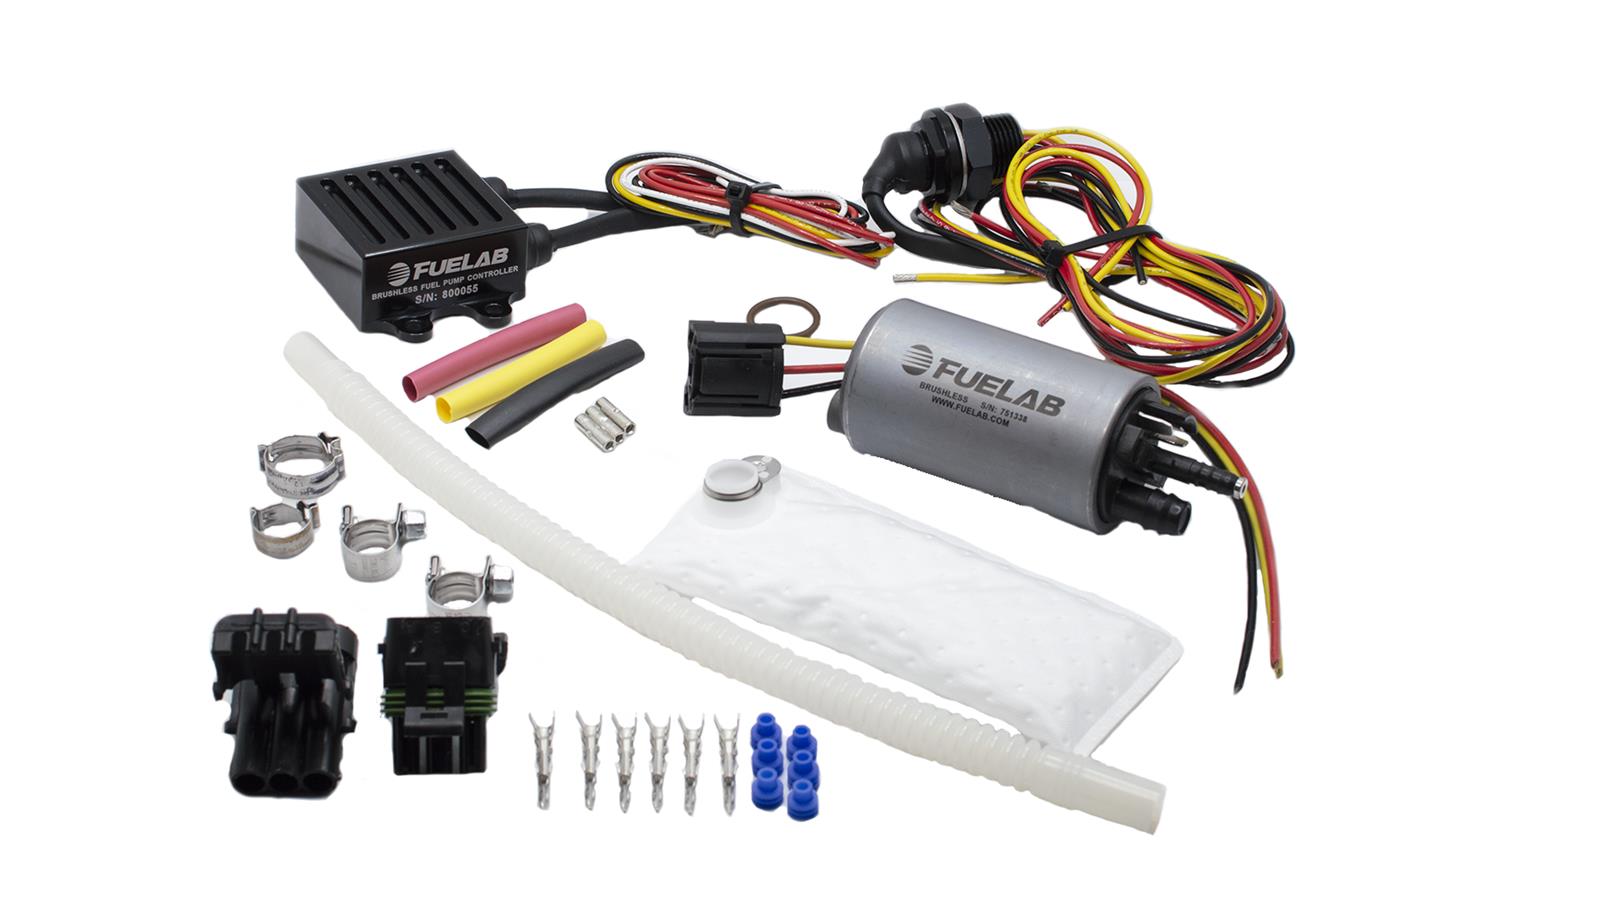 FUELAB 25304 In-Tank Brushless Fuel Pump Kit 350 LPH with 9 mm Barb Outlet, 6 mm Barb Siphon Photo-0 